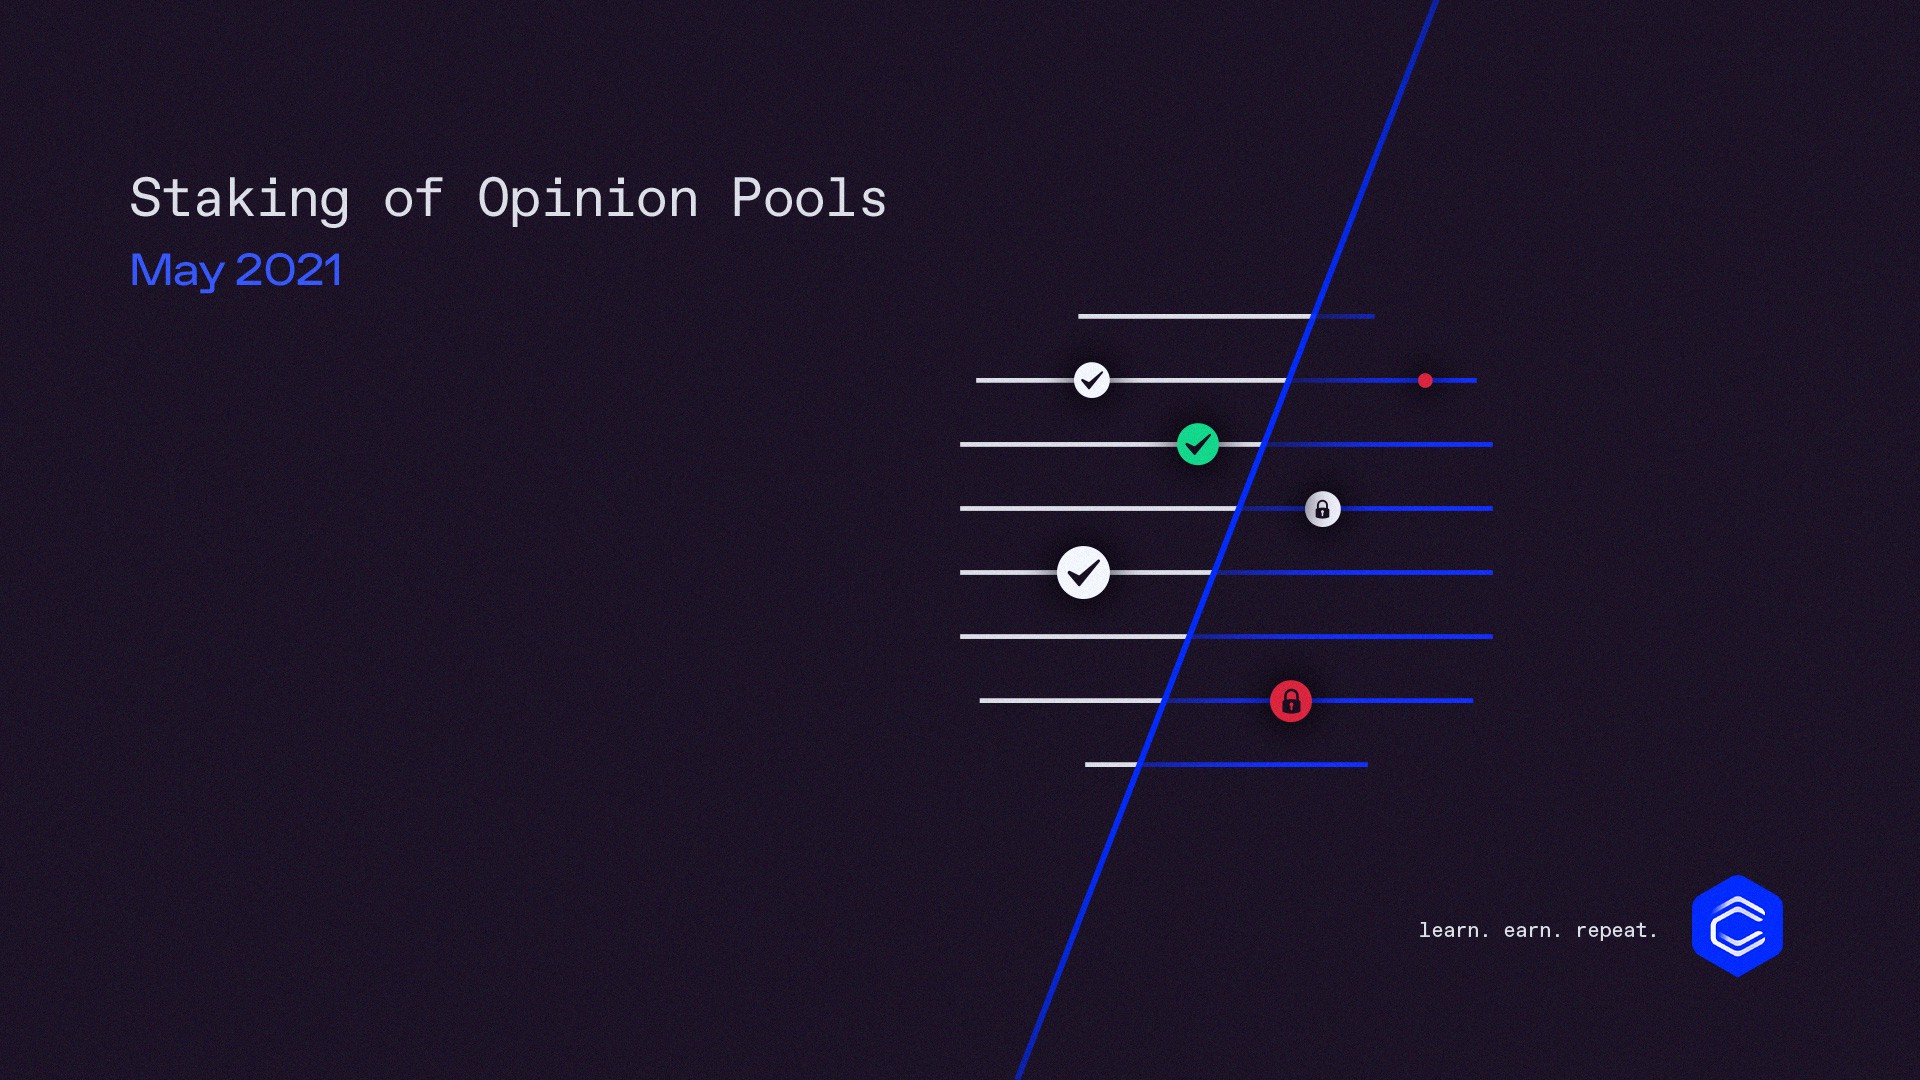 Staking of Opinion Pools (SOOP) Explained